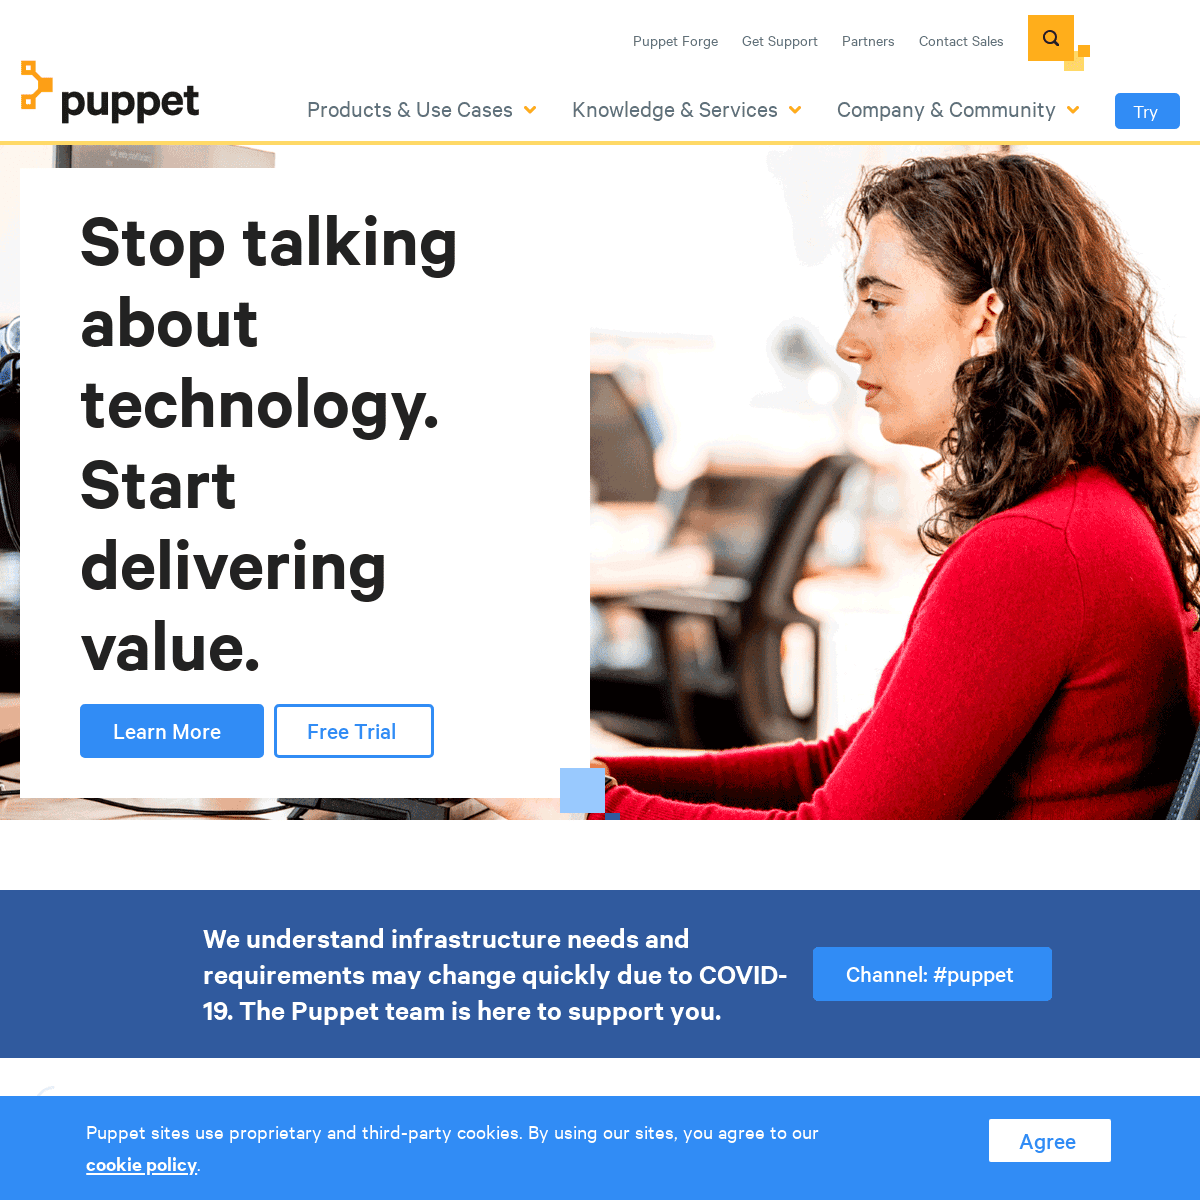 A complete backup of puppet.com